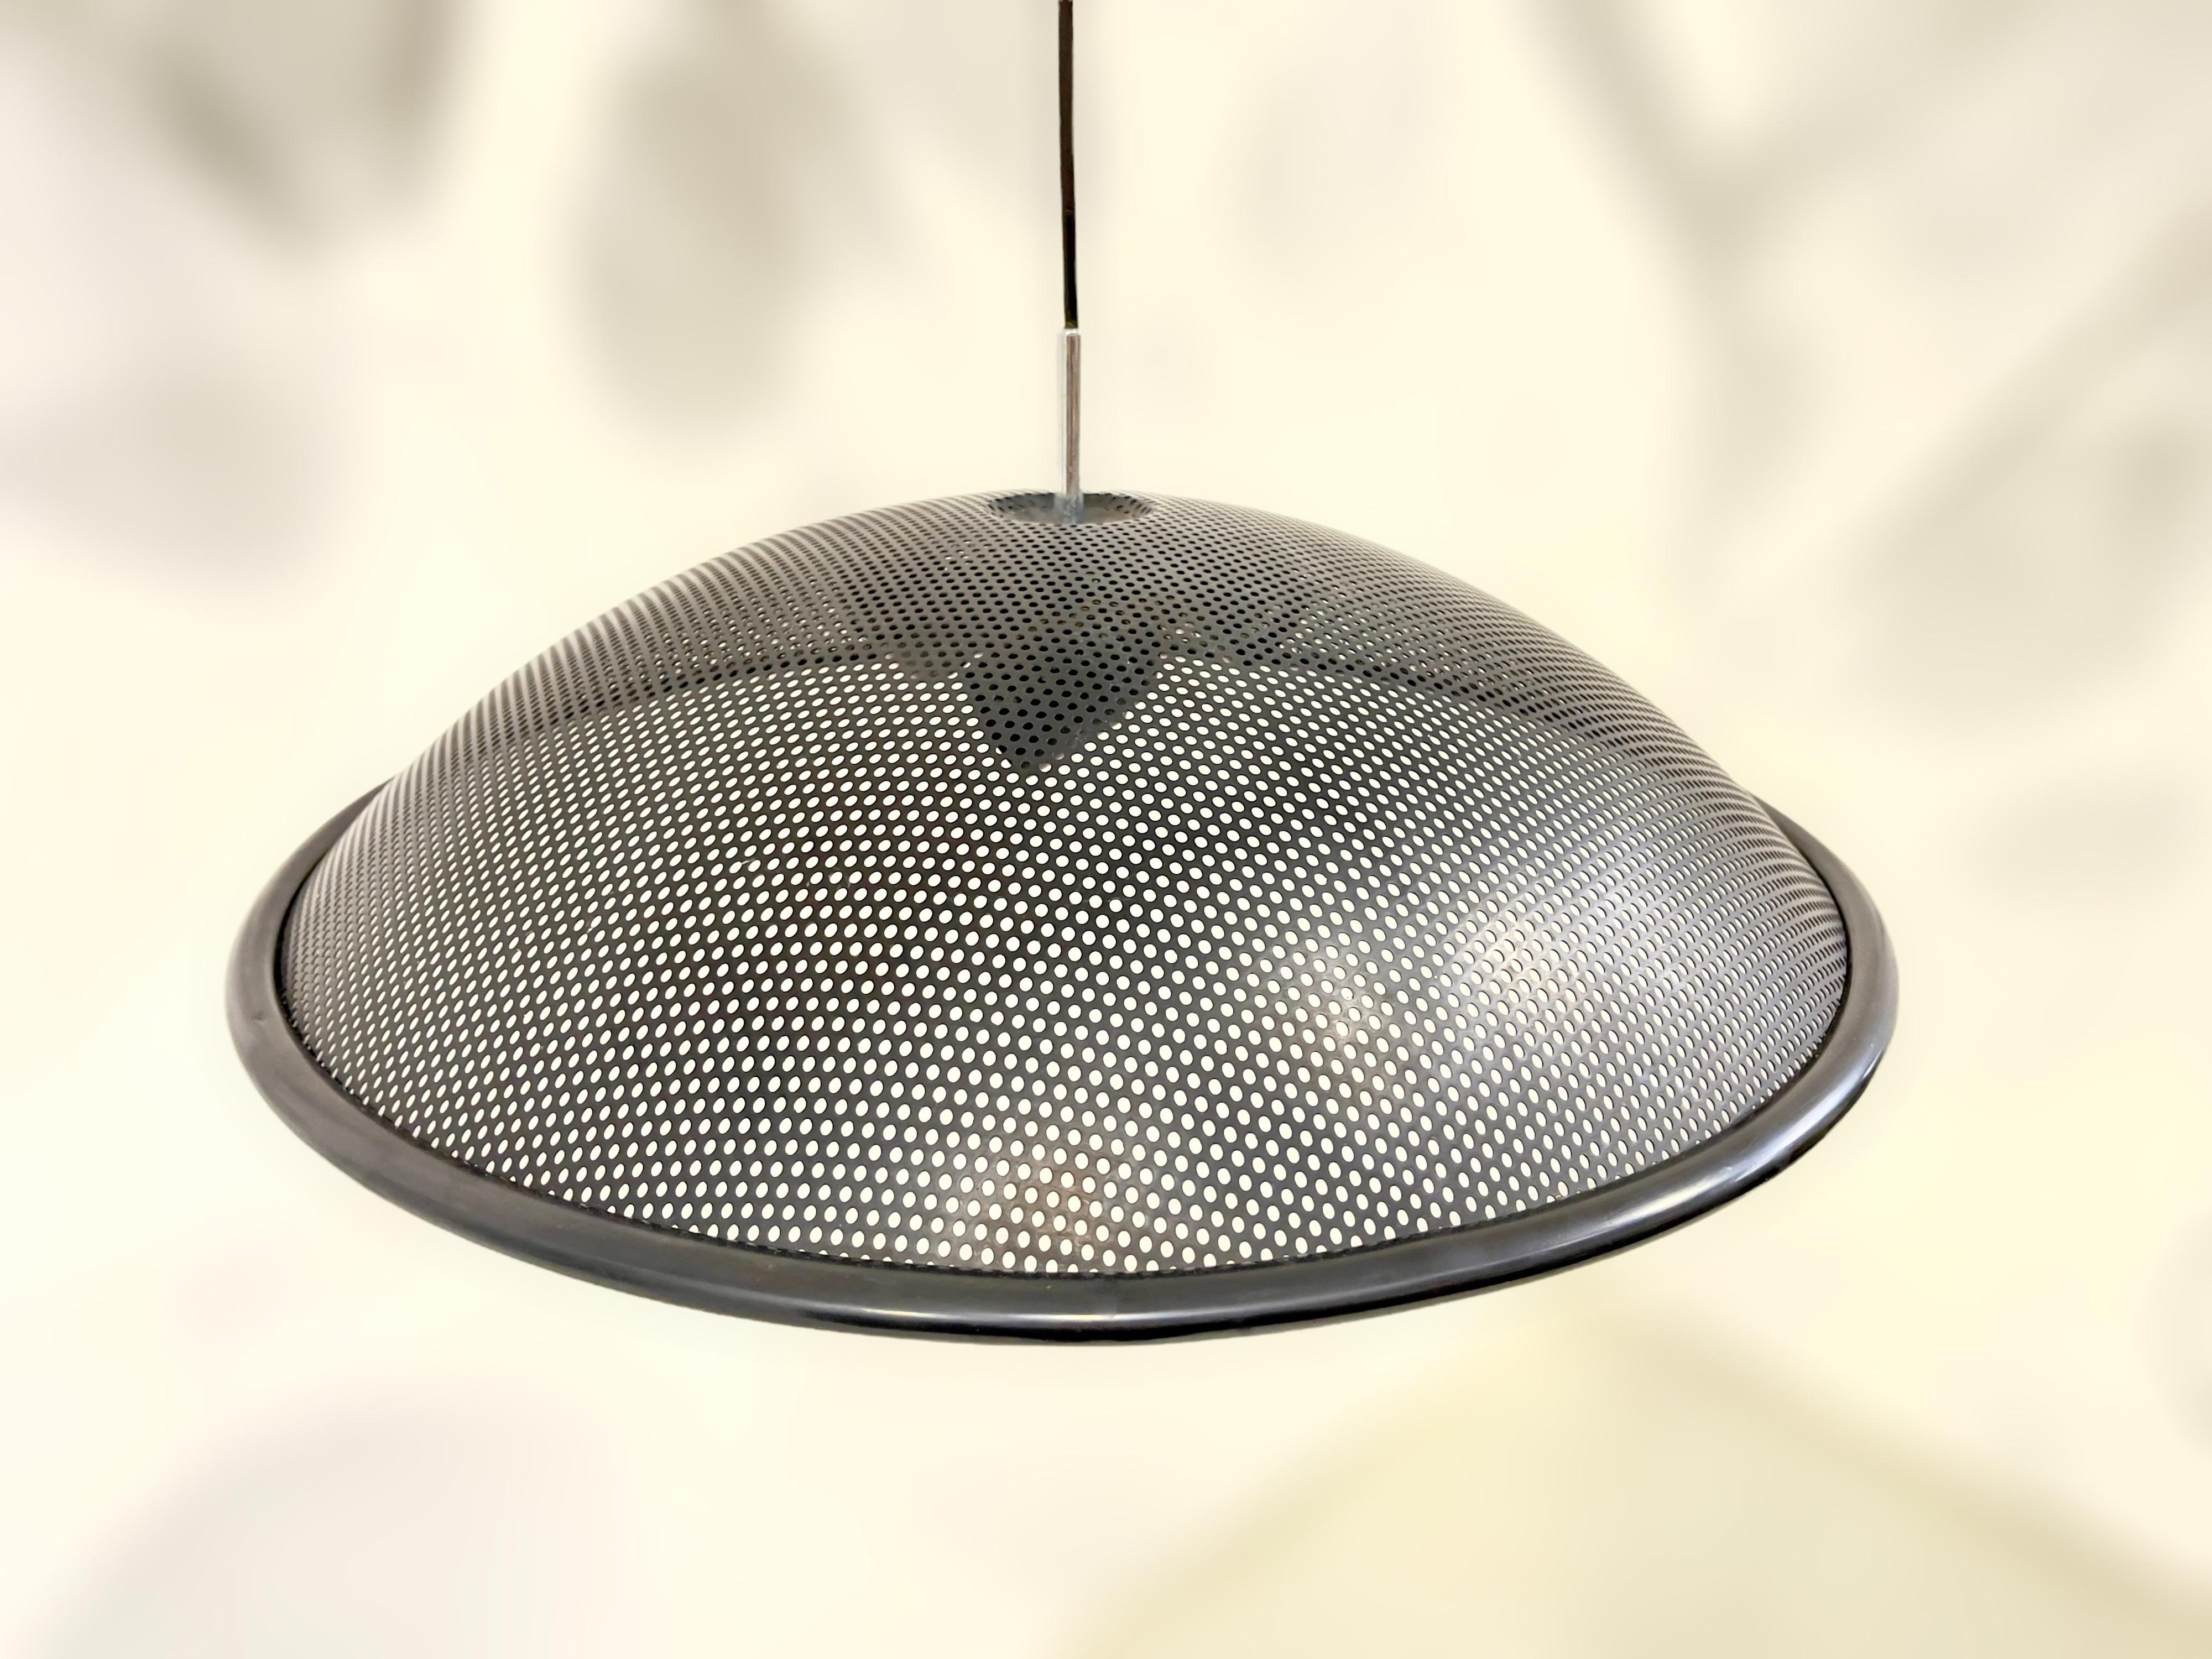 Modern Extendable Wall Lamp By Franco Mirenzi for Valenti 1970'S   For Sale